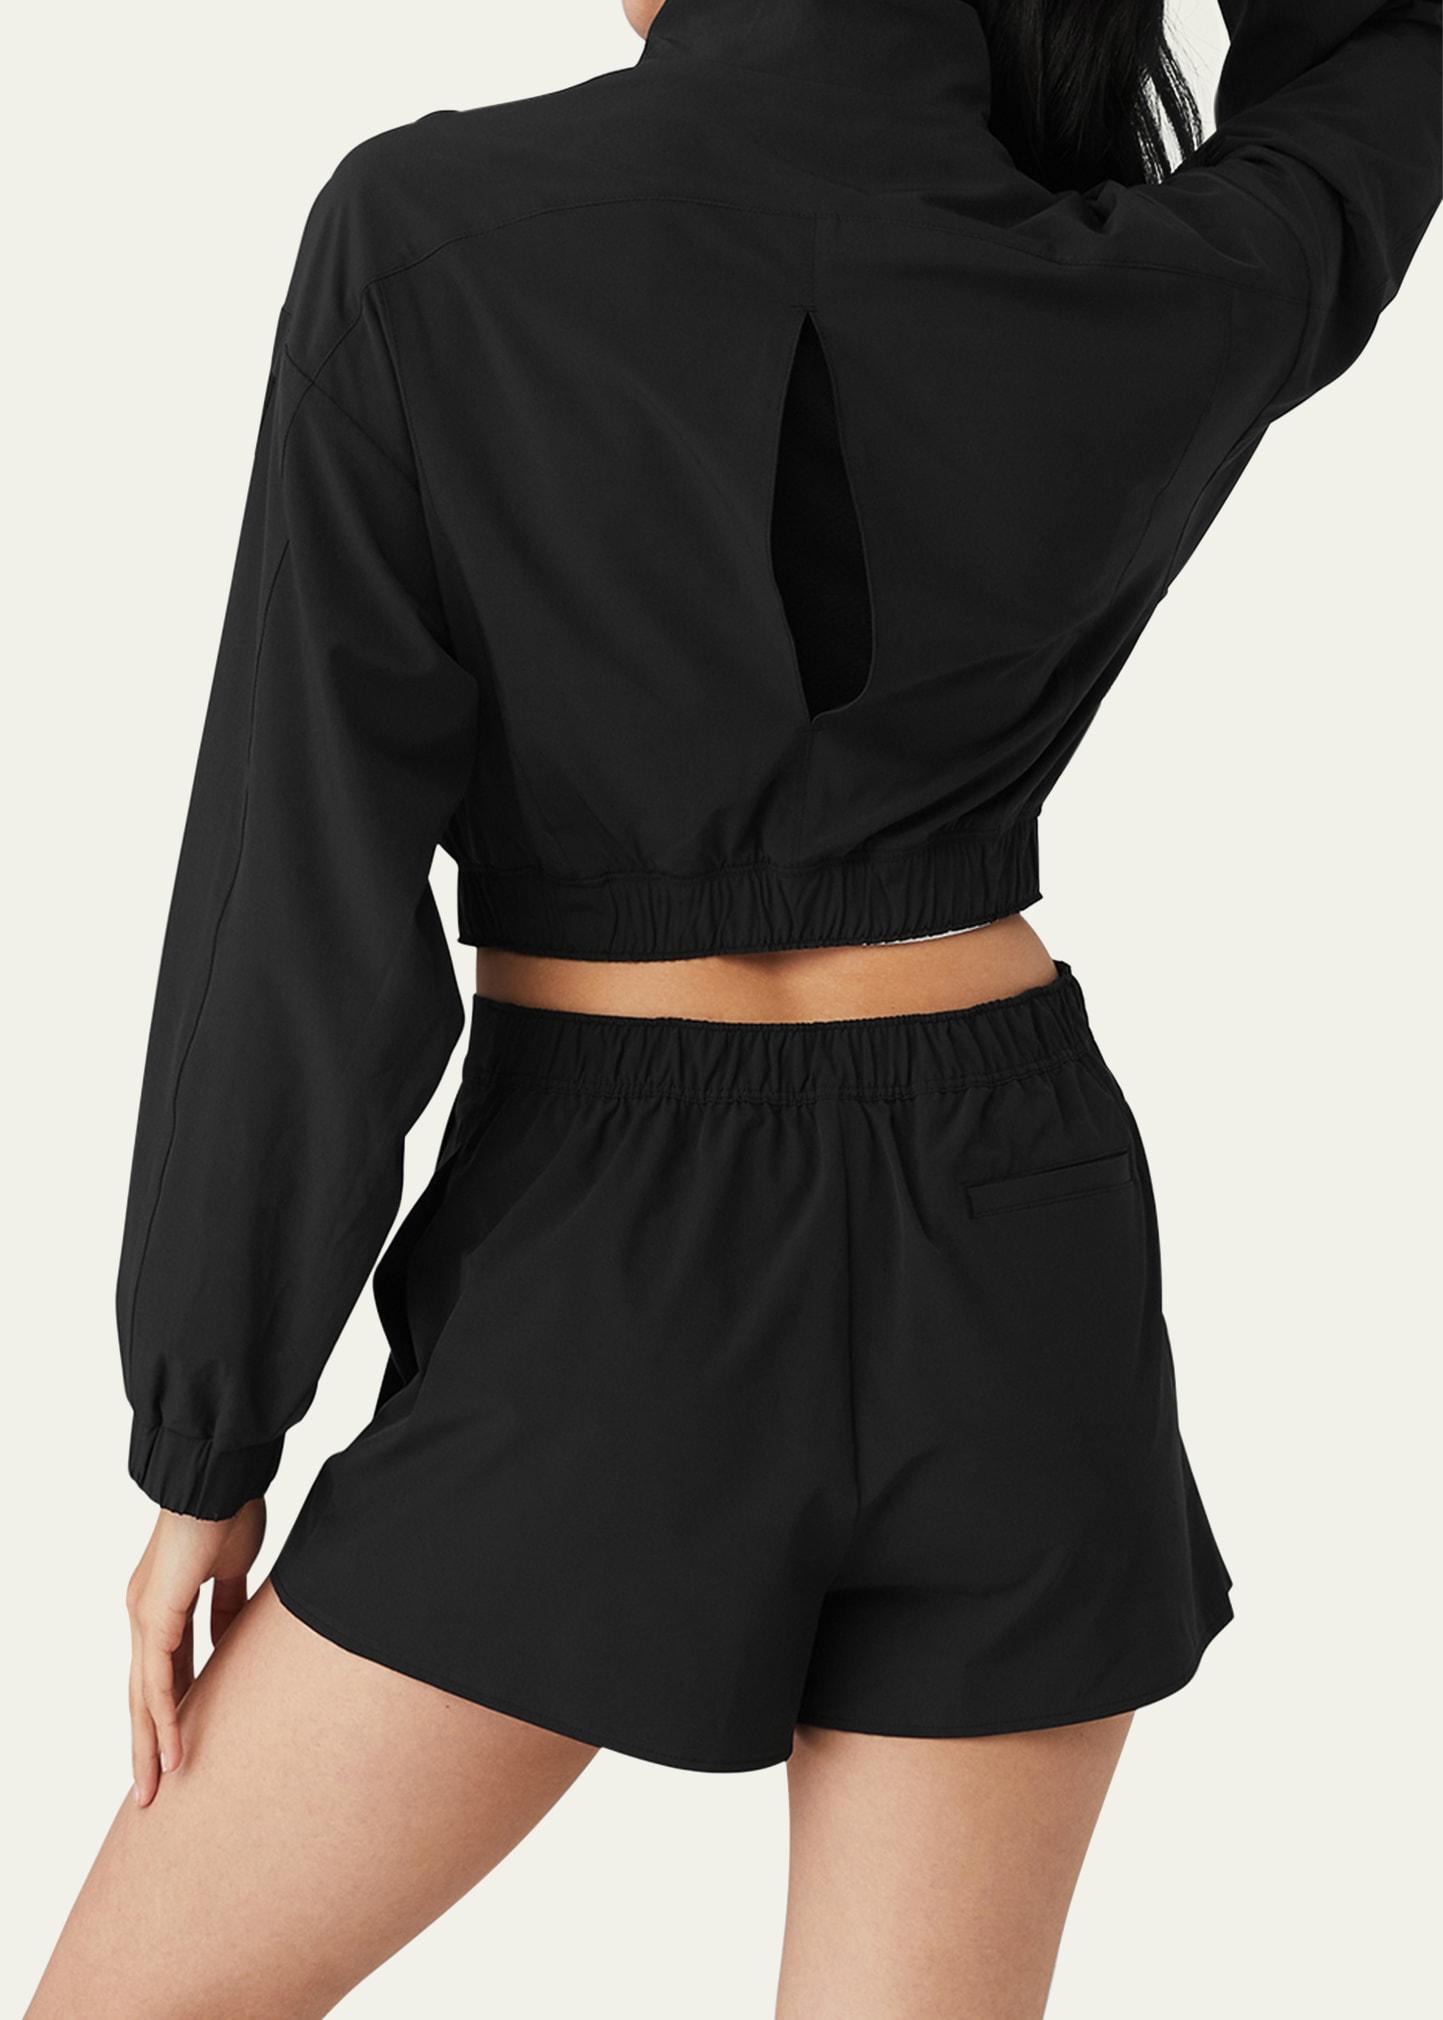 Alo Yoga Clubhouse Jacket in Black